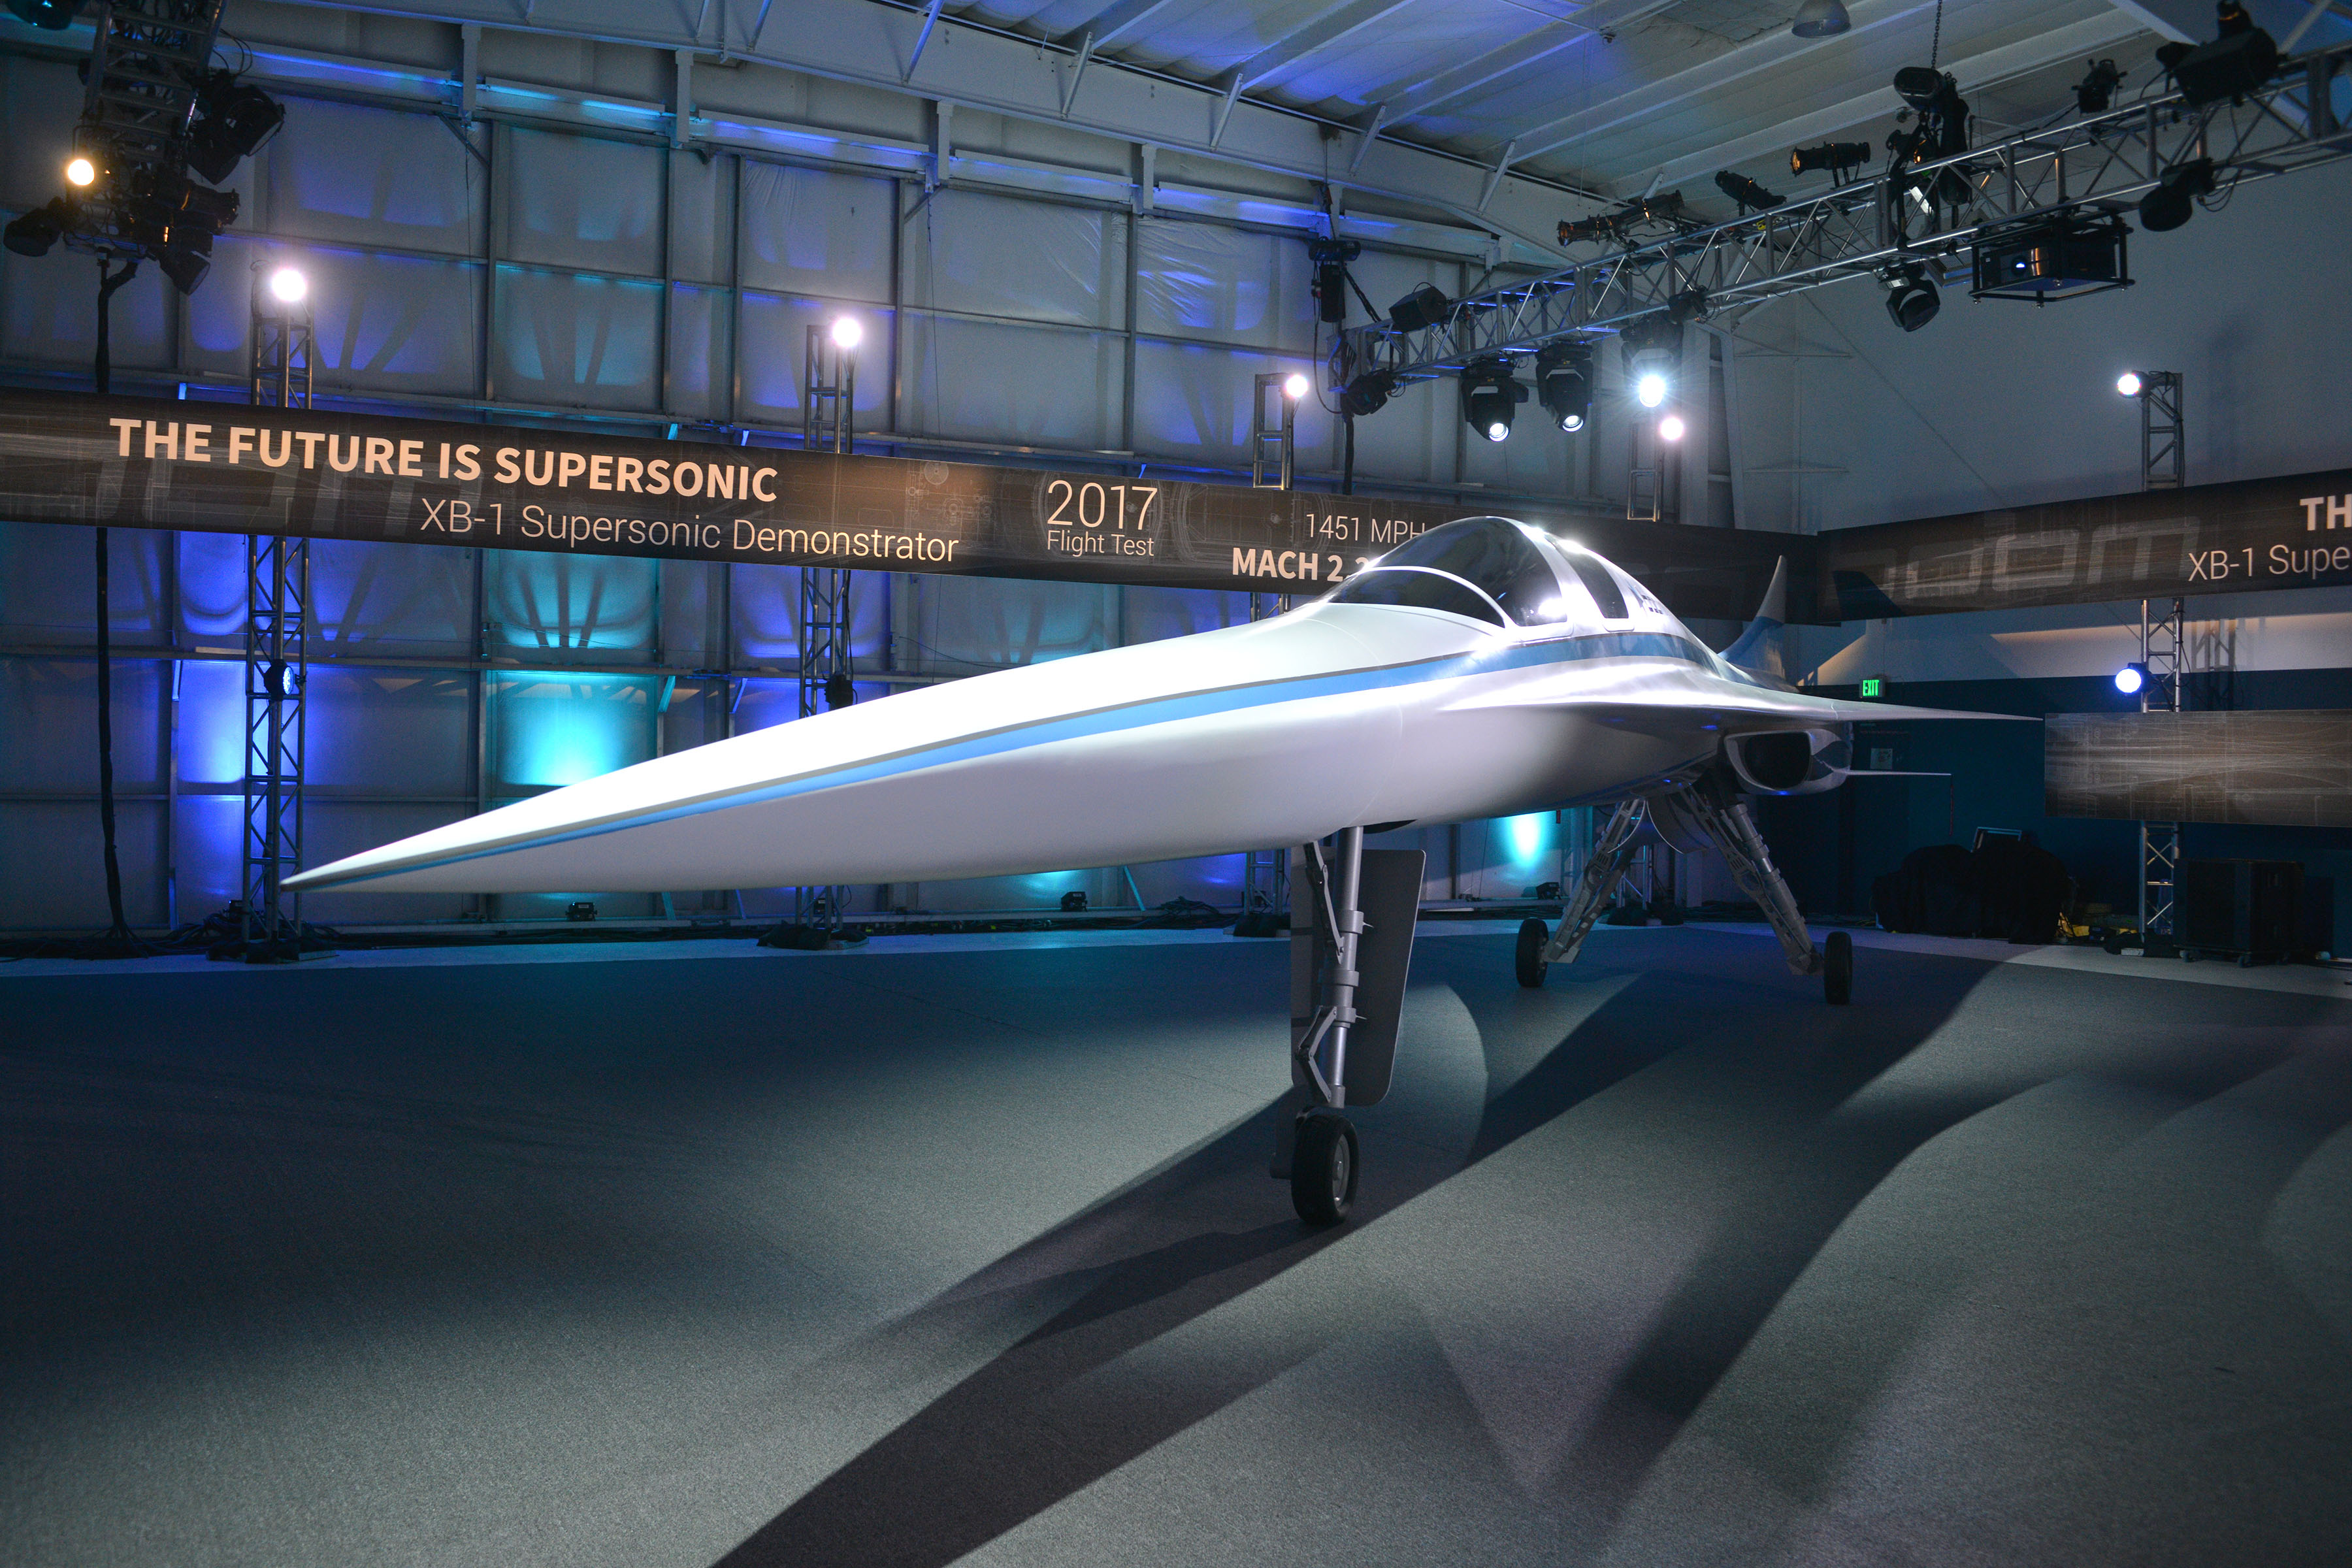 A view of the XB-1 Supersonic Demonstrator at the official unveiling at the Boom Technologies hanger on November 15, 2016 in Englewood, Colorado. (Tom Cooper—Getty Images for Boom Technology)